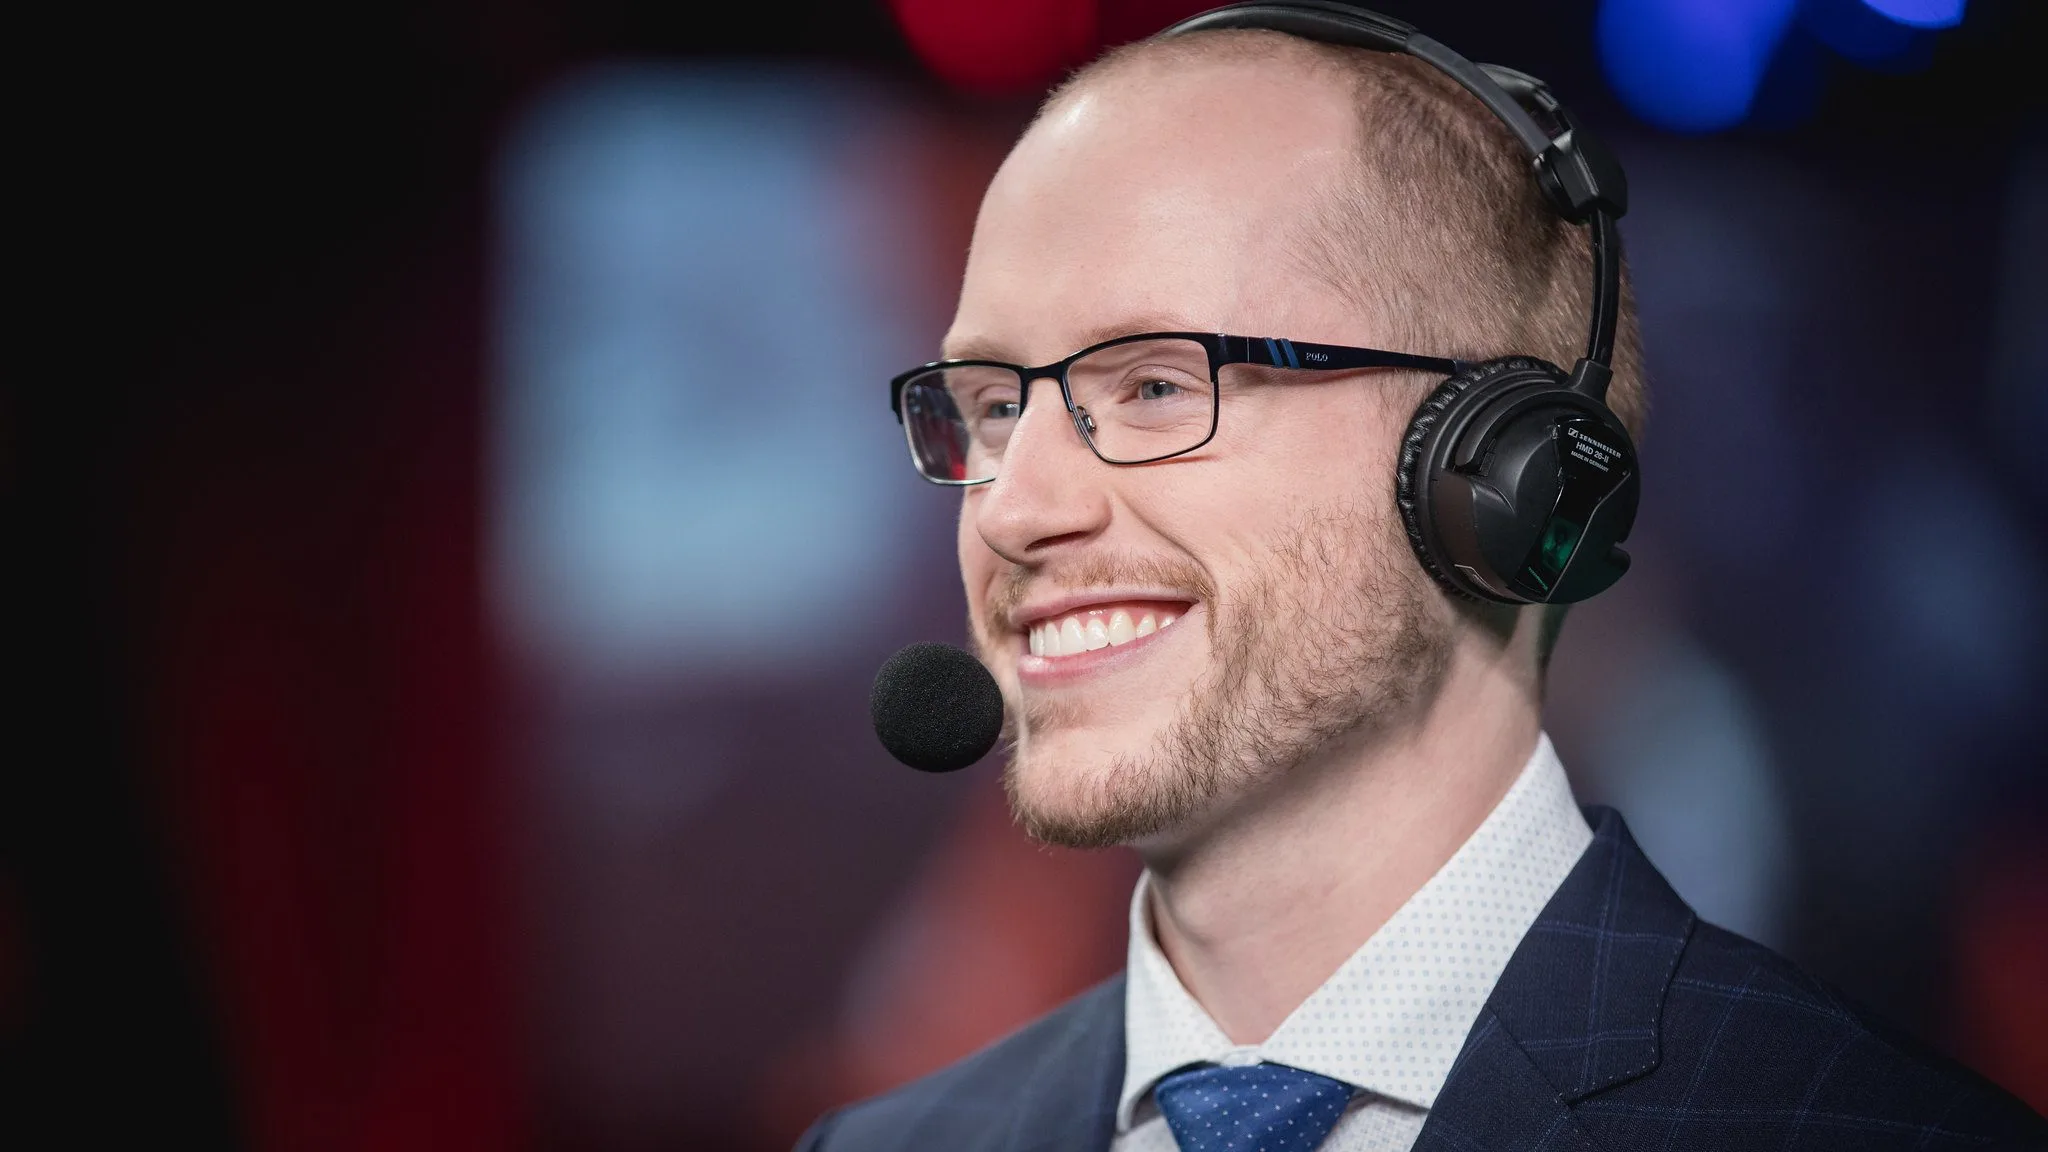 The Dive podcast dedicated to the LCS walkout delayed due to “concerns”